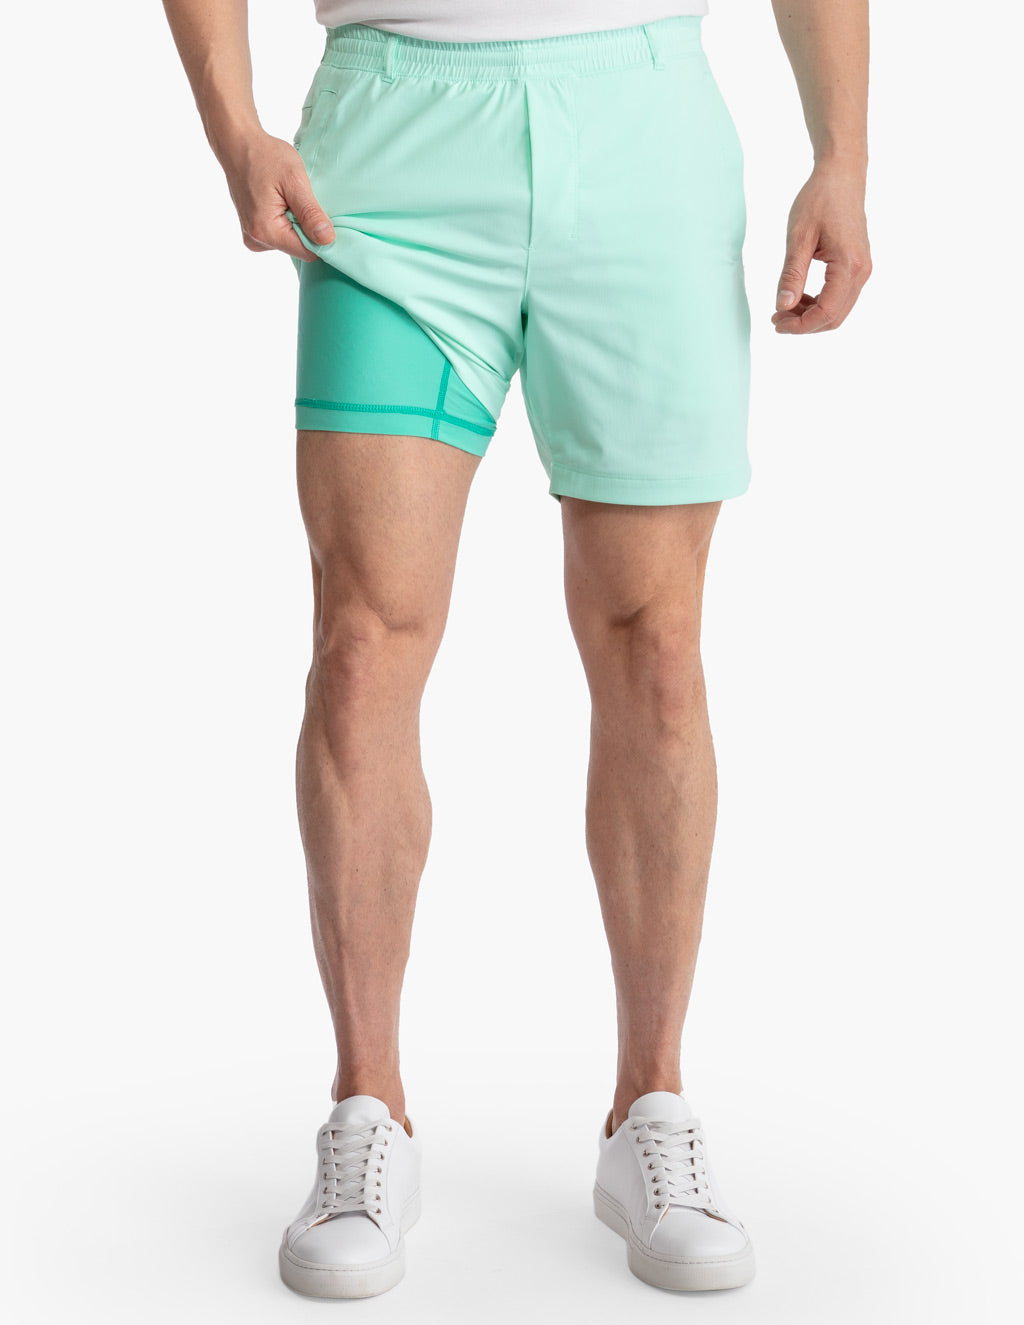 Going Commando Never Looked So Hot (Or Funny) in This Gym Shorts